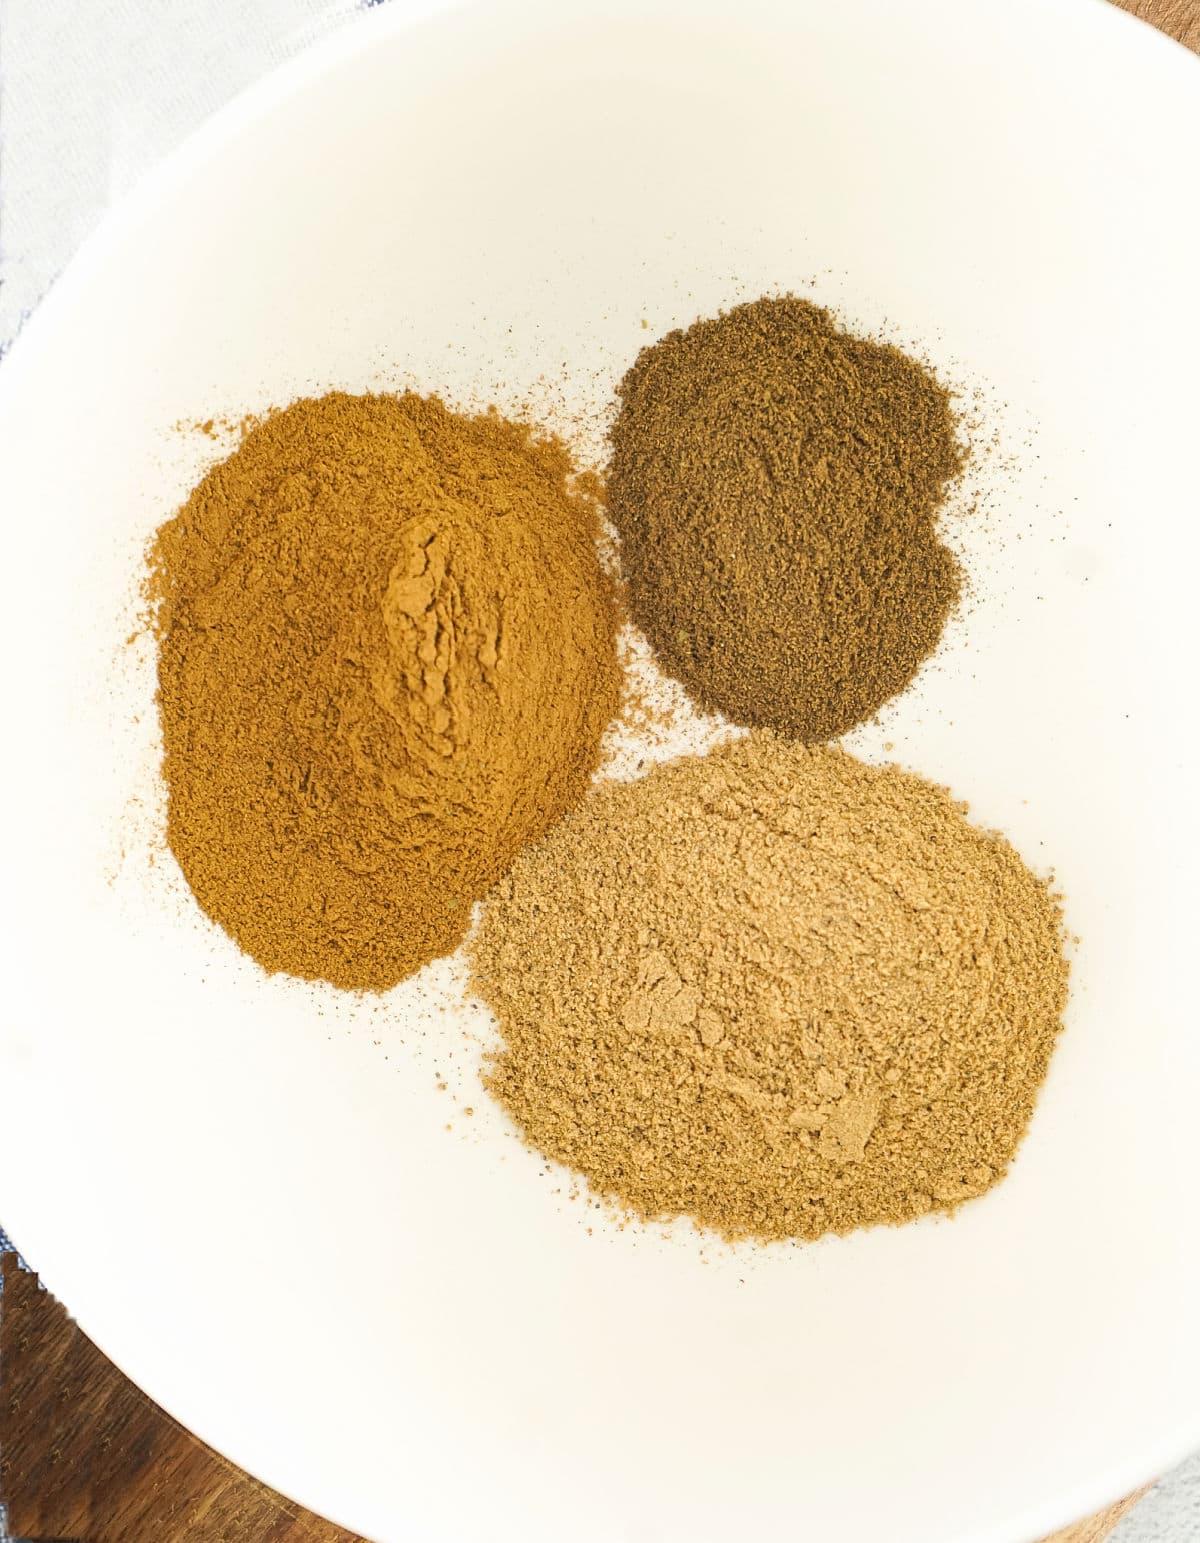 Mounds of ground cinnamon, nutmeg and allspice in a white bowl.